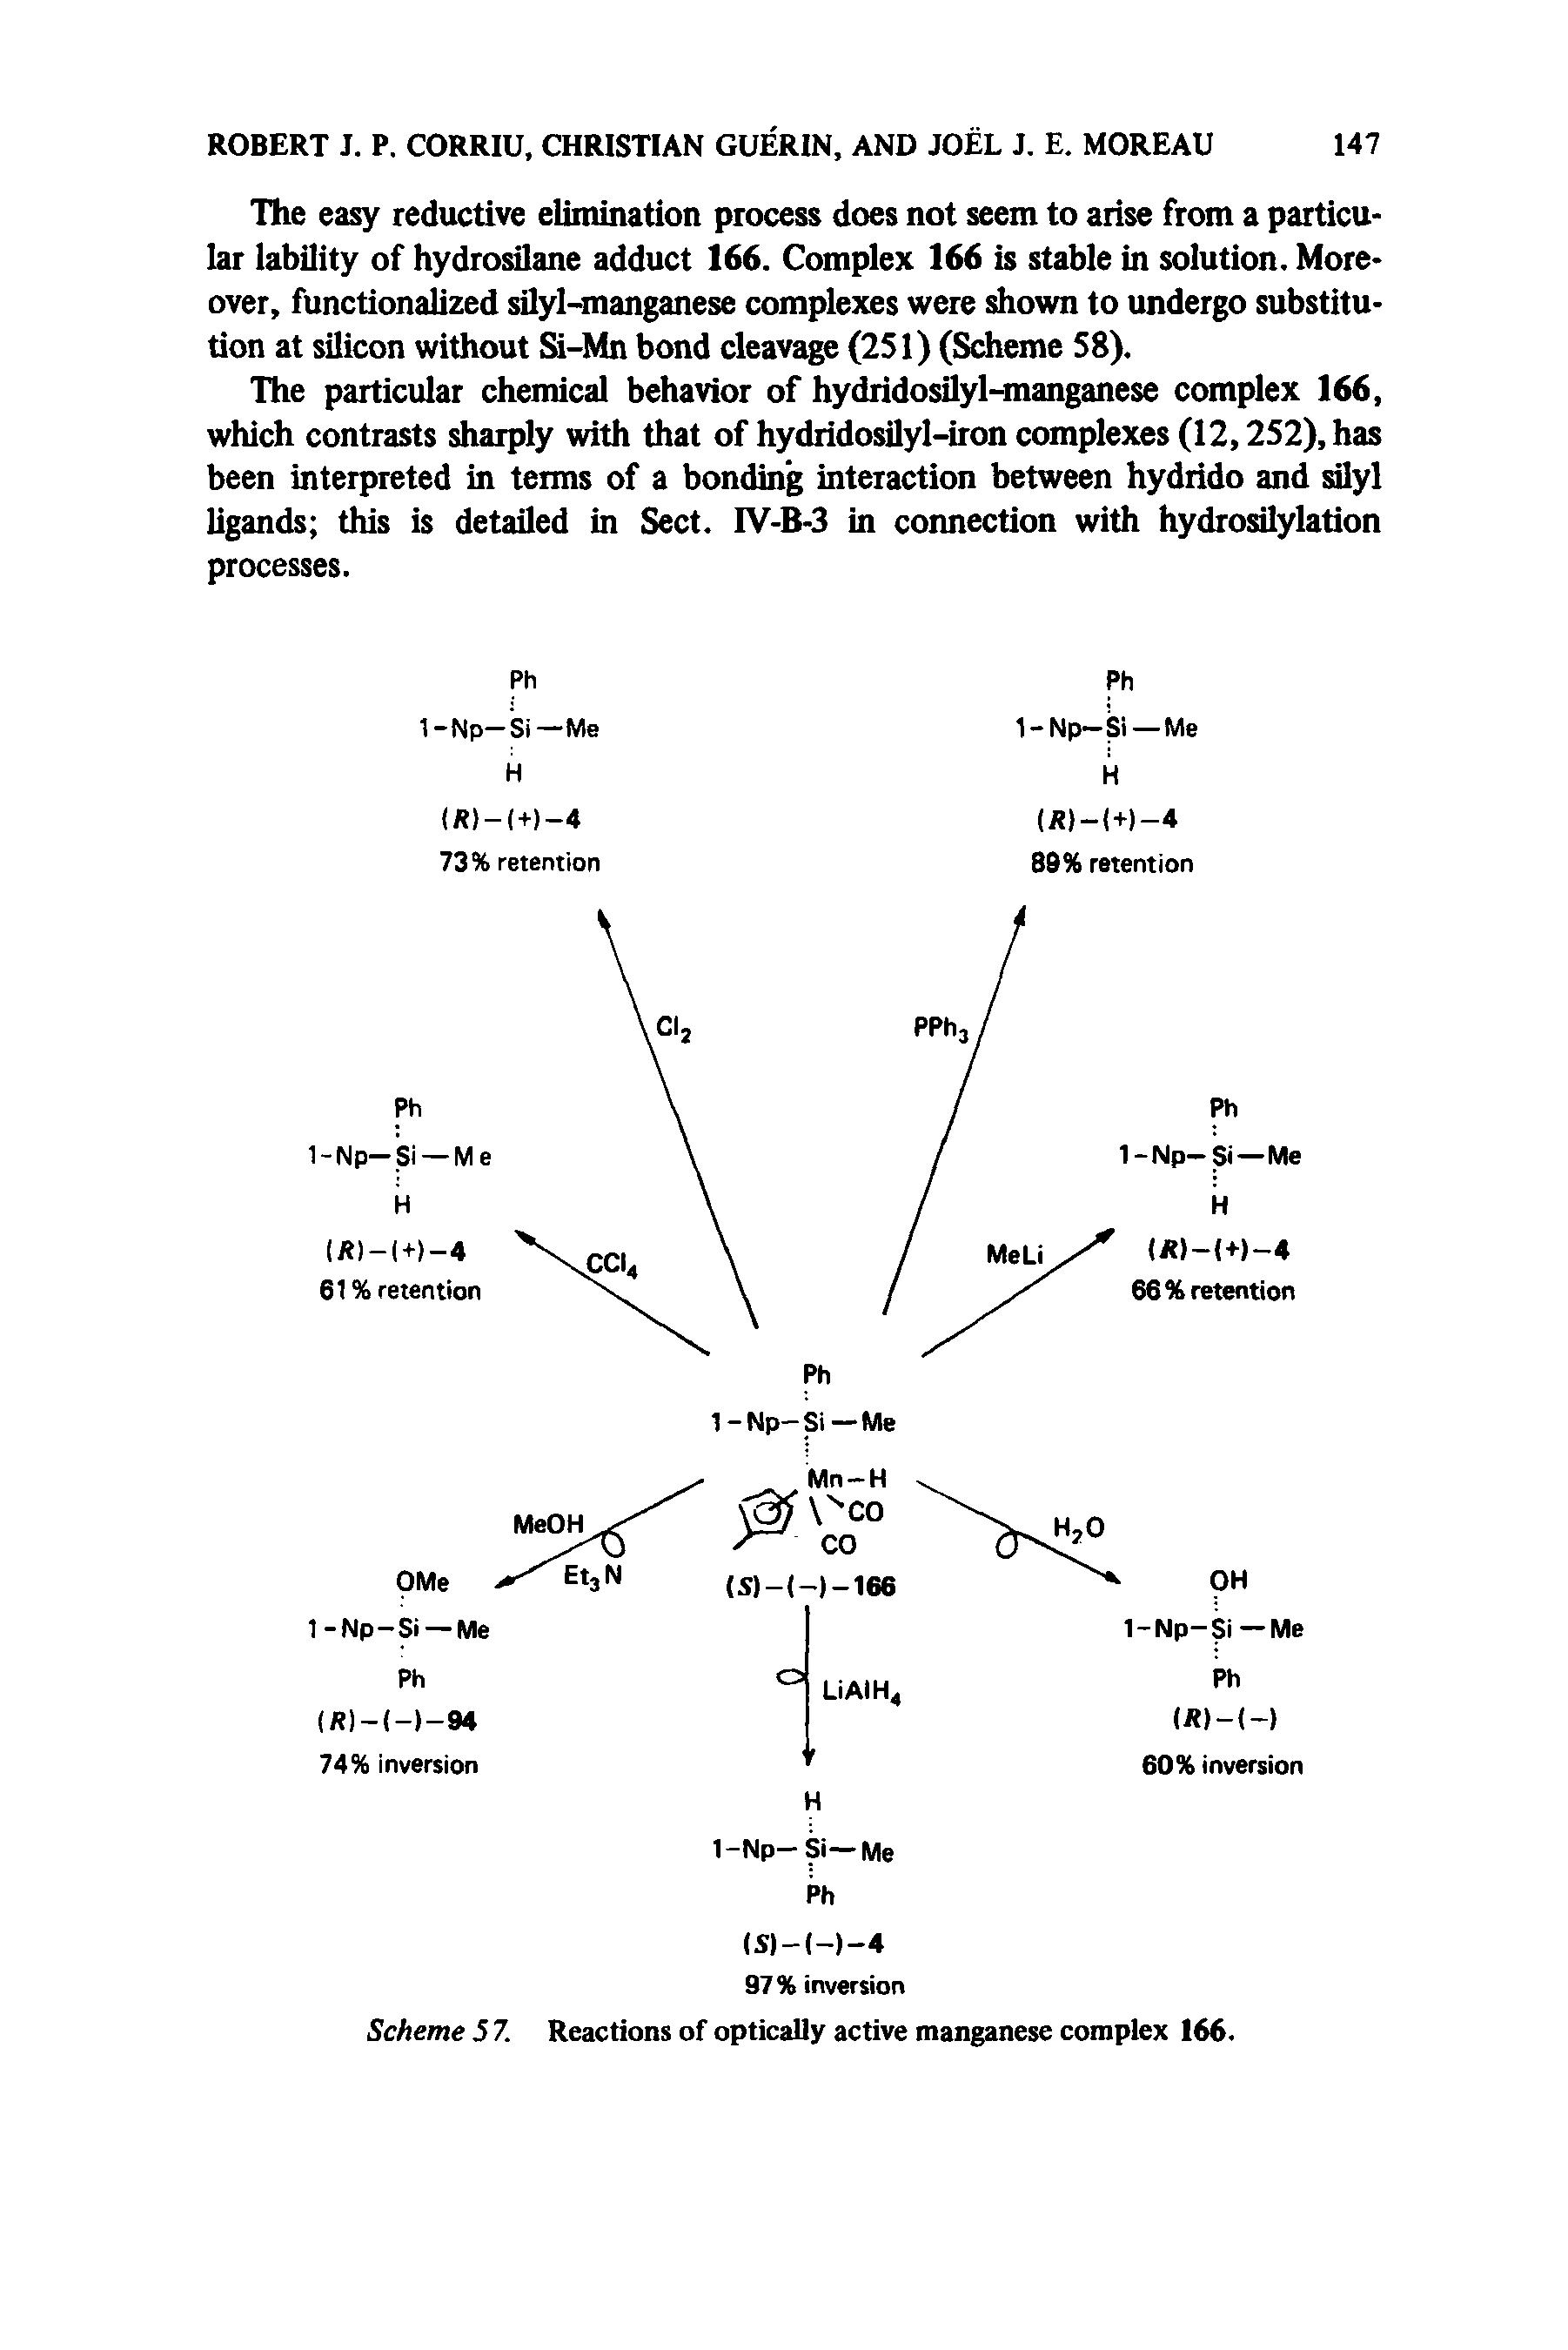 Scheme 5 7. Reactions of optically active manganese complex 166.